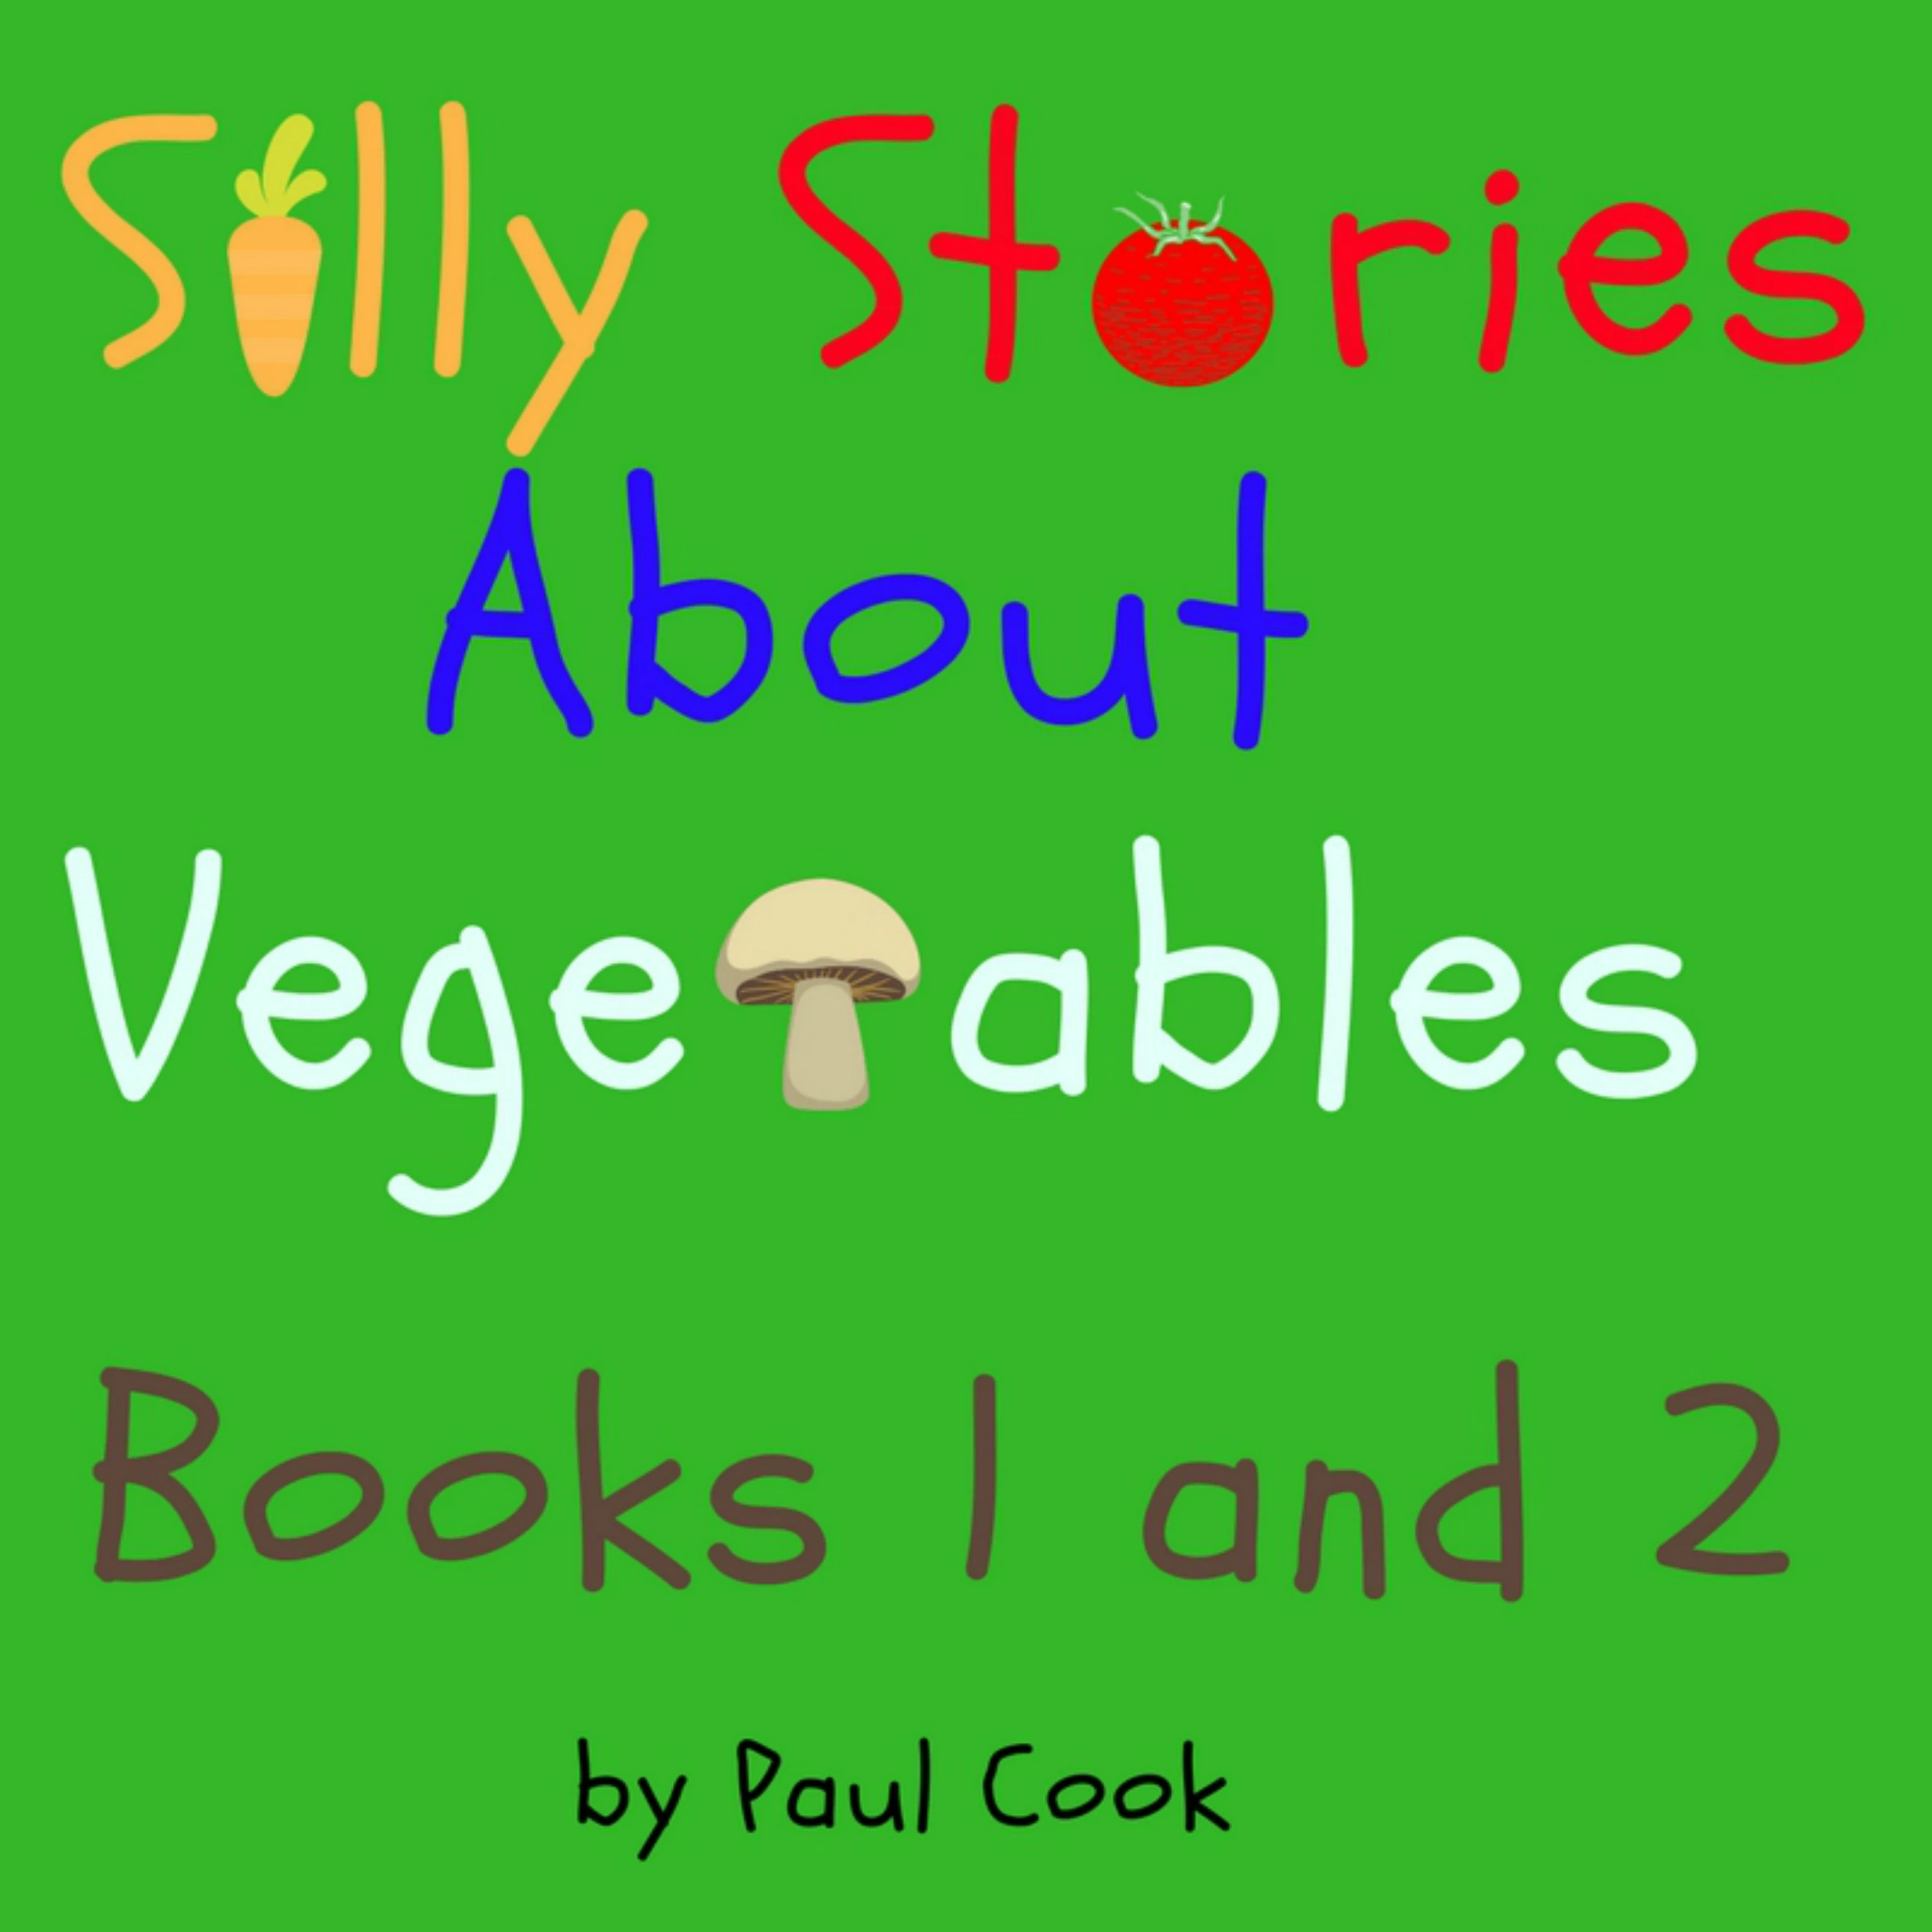 Silly Stories About Vegetables Books 1 and 2 Audiobook by Paul Cook